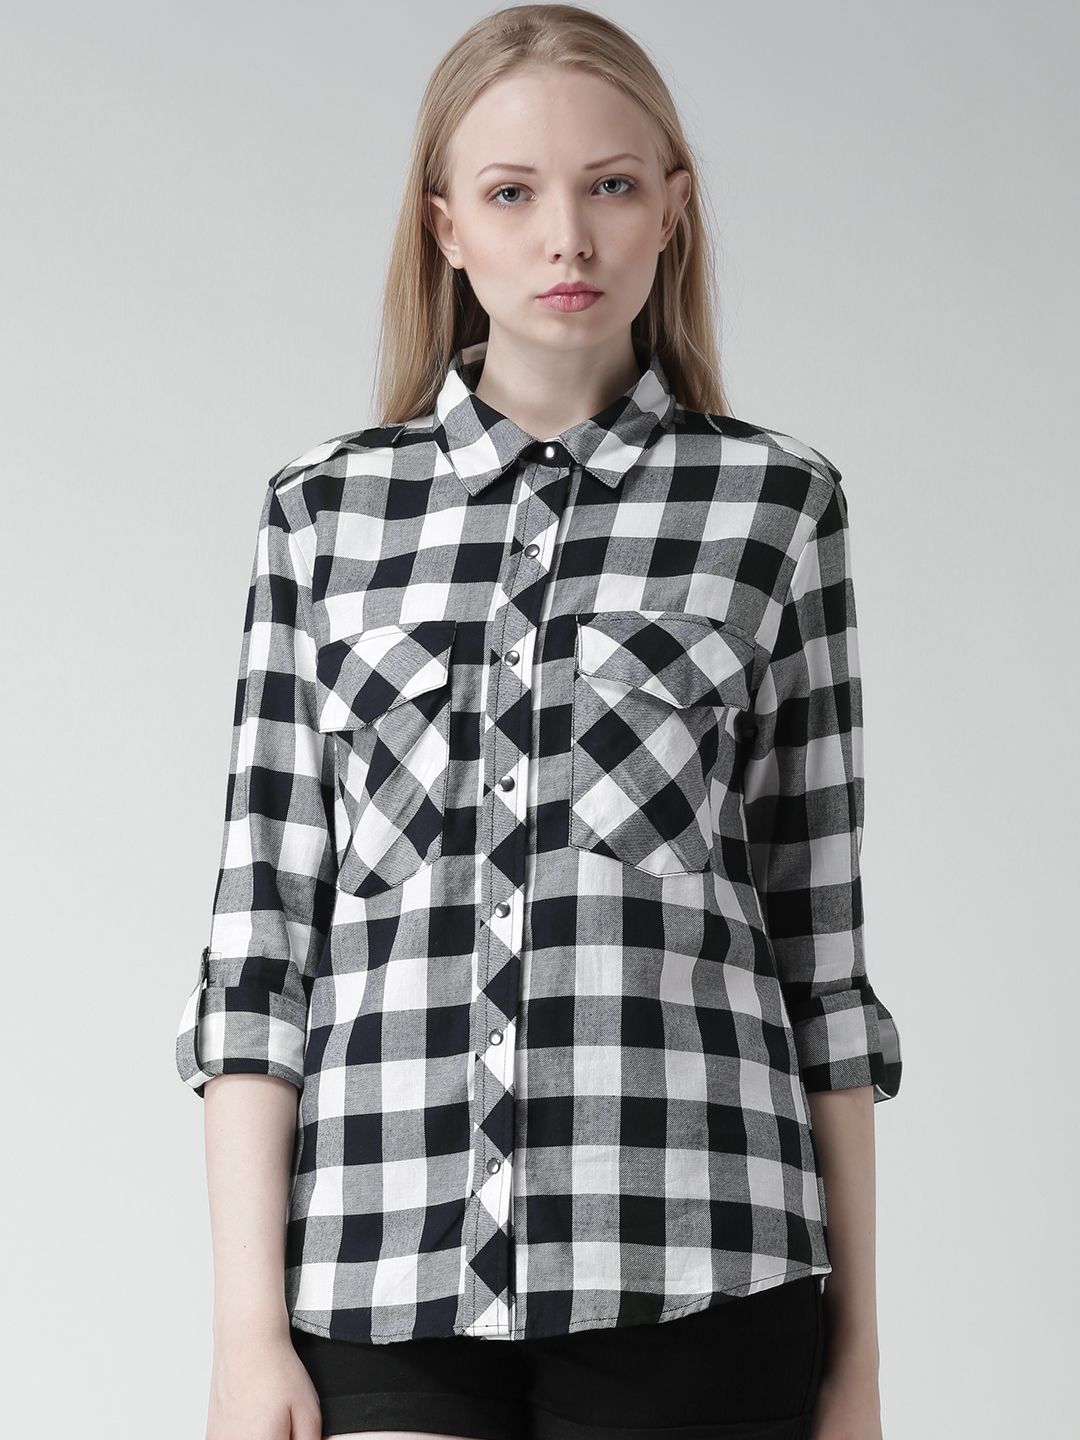 Buy FOREVER 21 Black & White Checked Casual Shirt - Apparel for Women